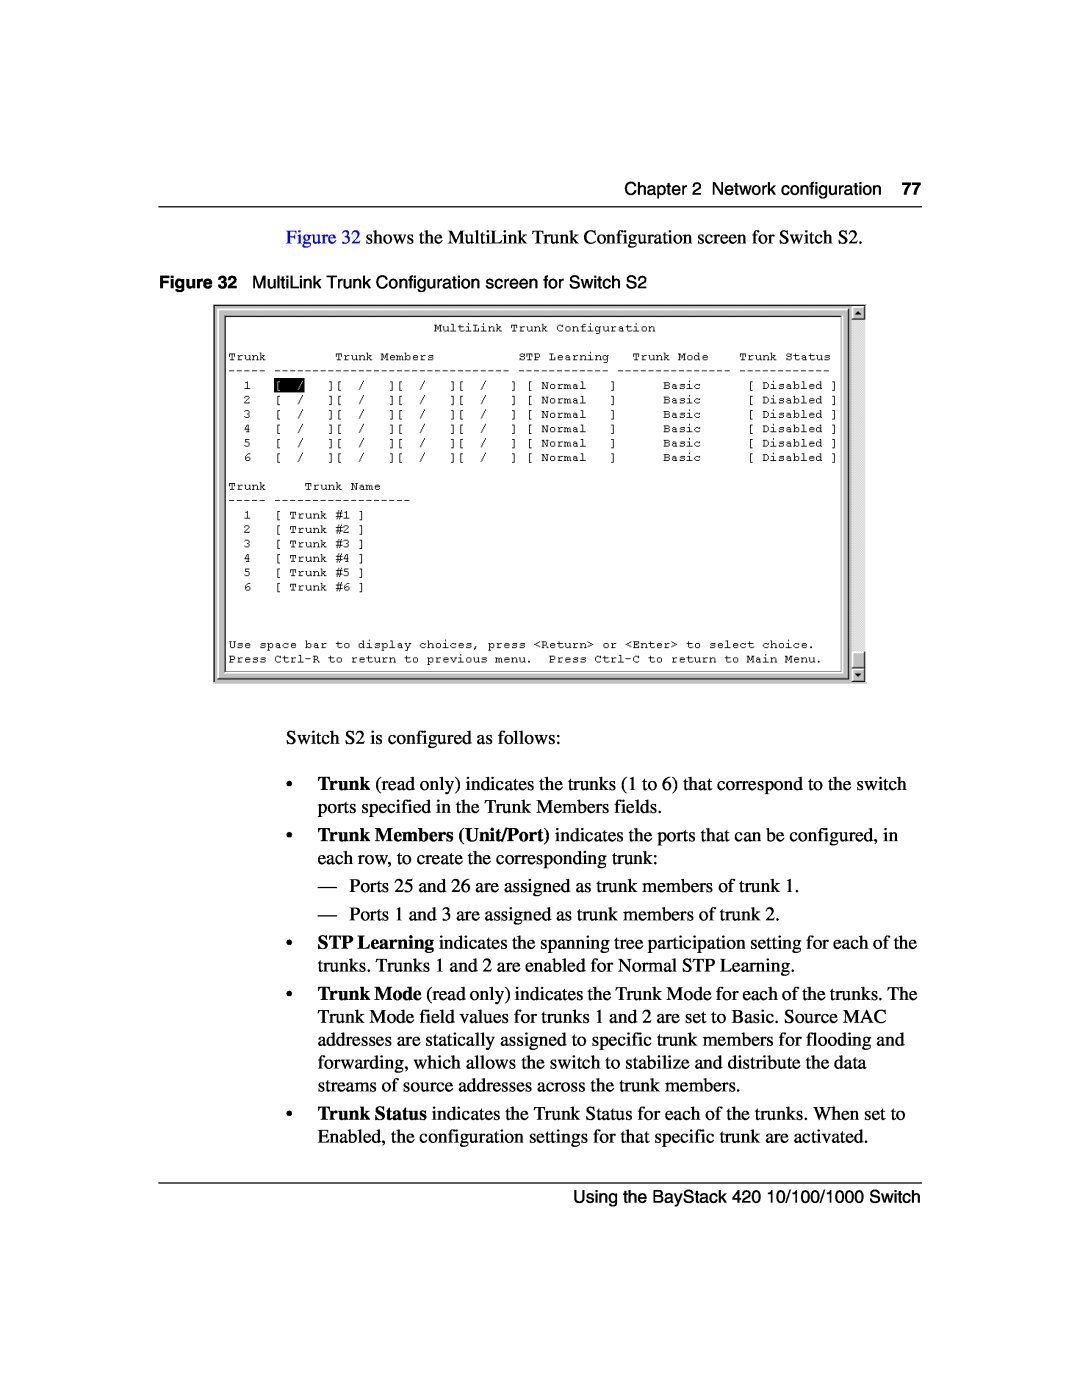 Nortel Networks 1000ASE-XD, 1000BASE-SX, 1000BASE-LX manual shows the MultiLink Trunk Configuration screen for Switch S2 